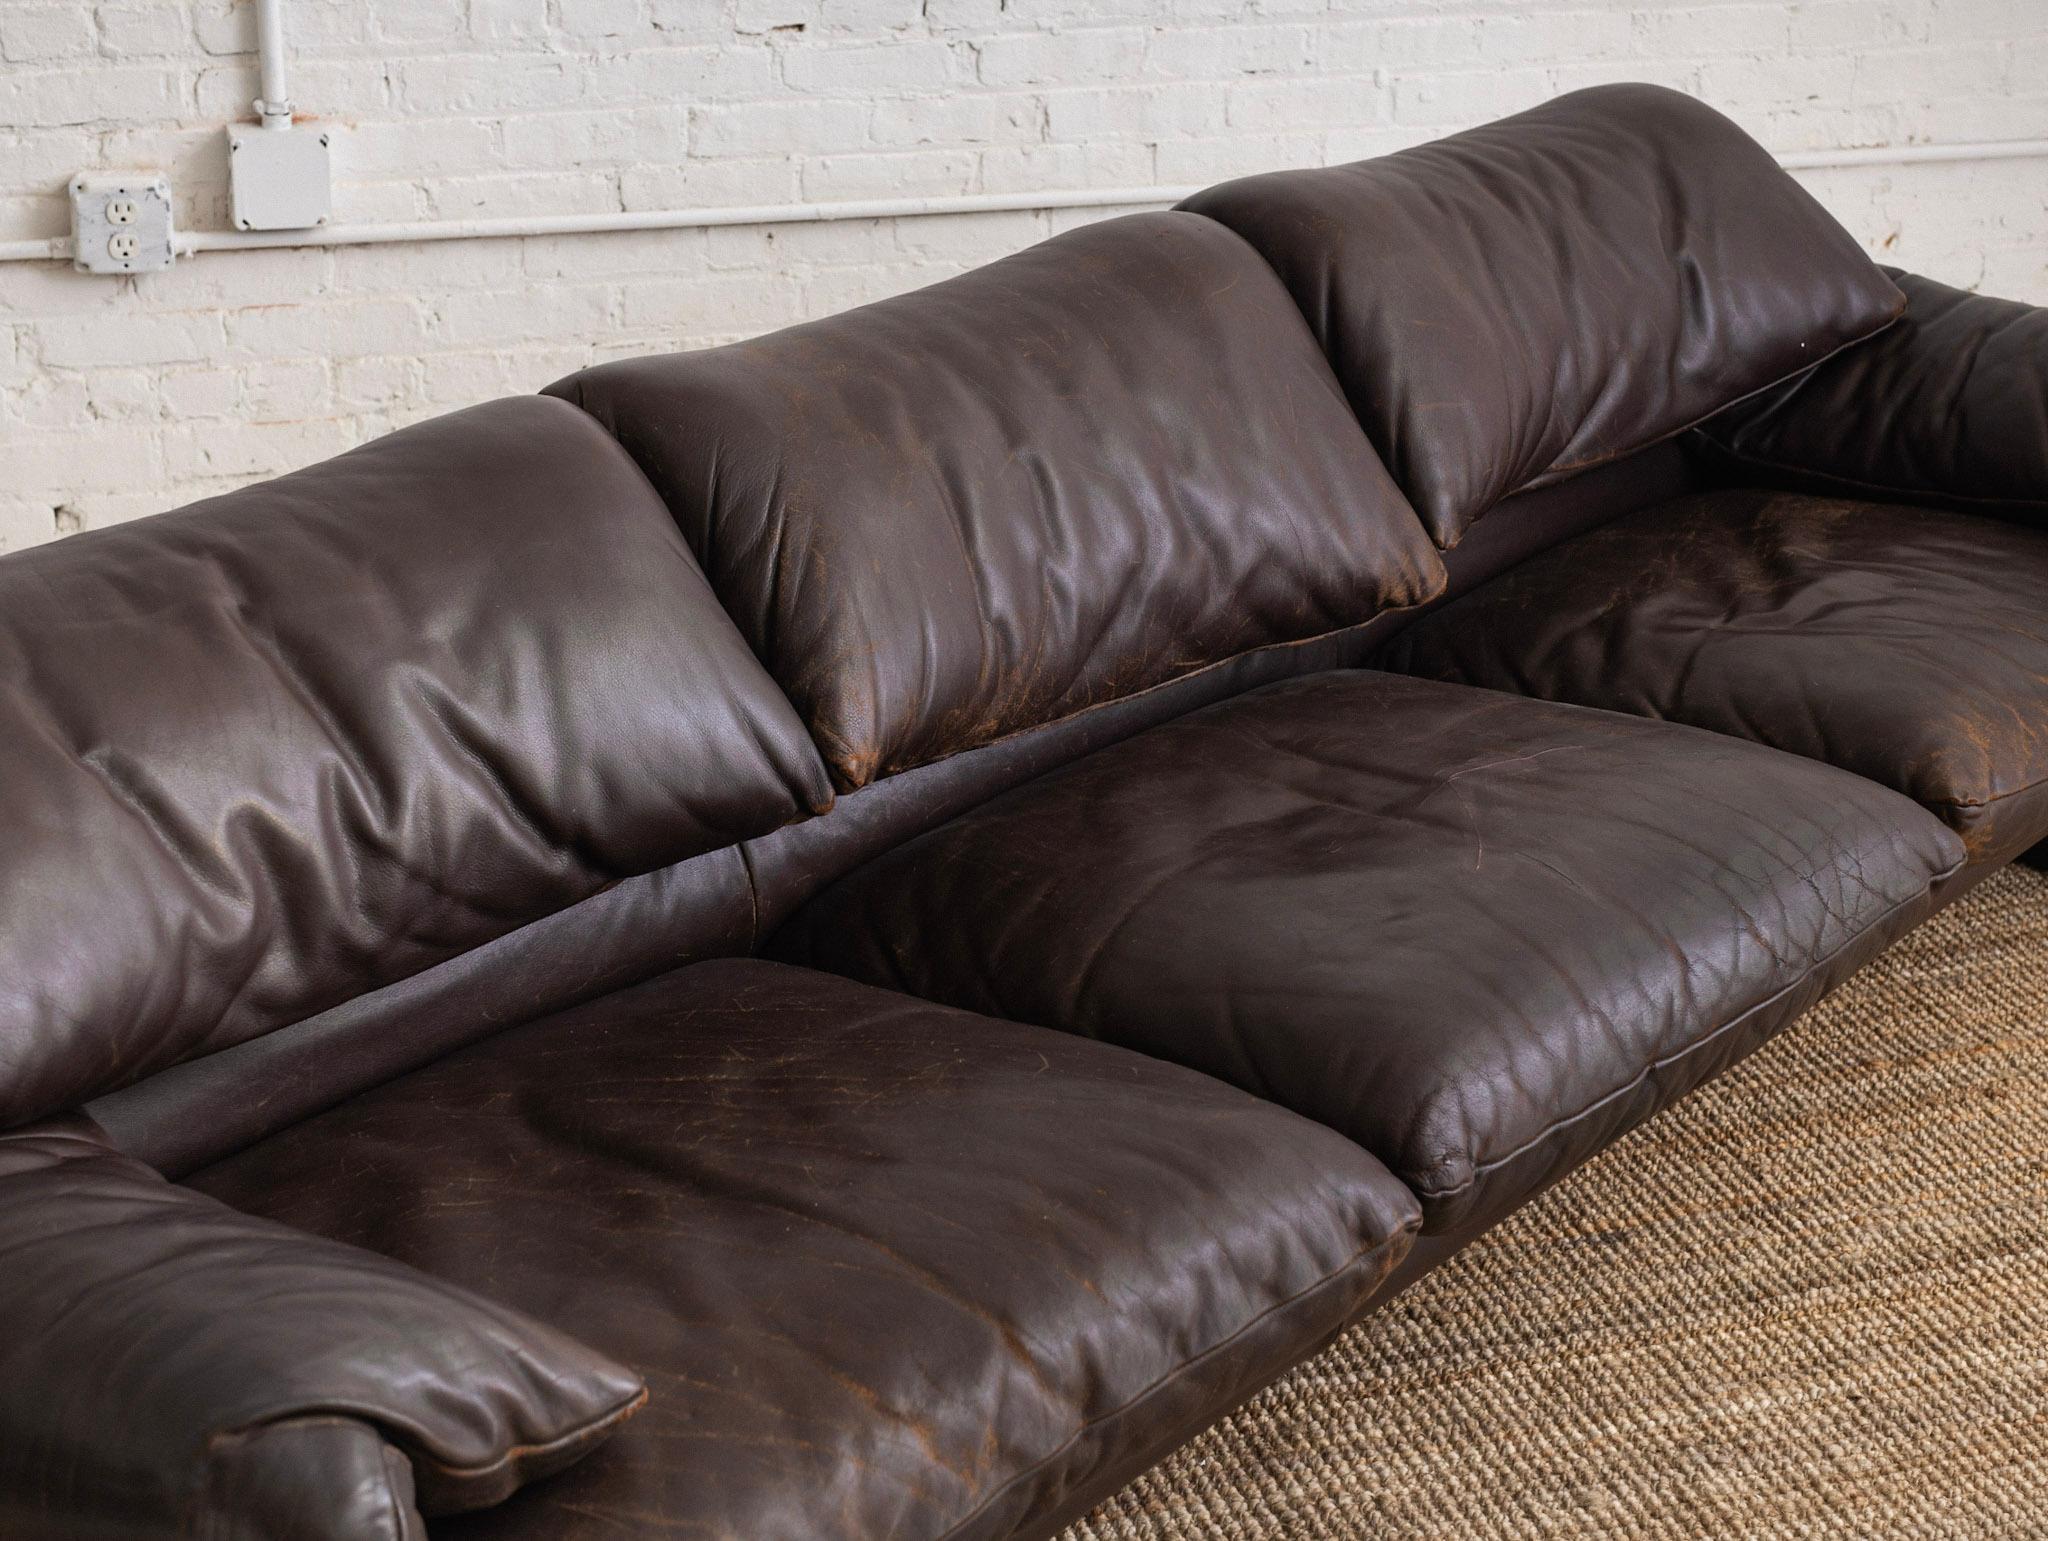 Maralunga 3 Seat Sofa by Vico Magistretti for Cassina in Chocolate Brown Leather 2